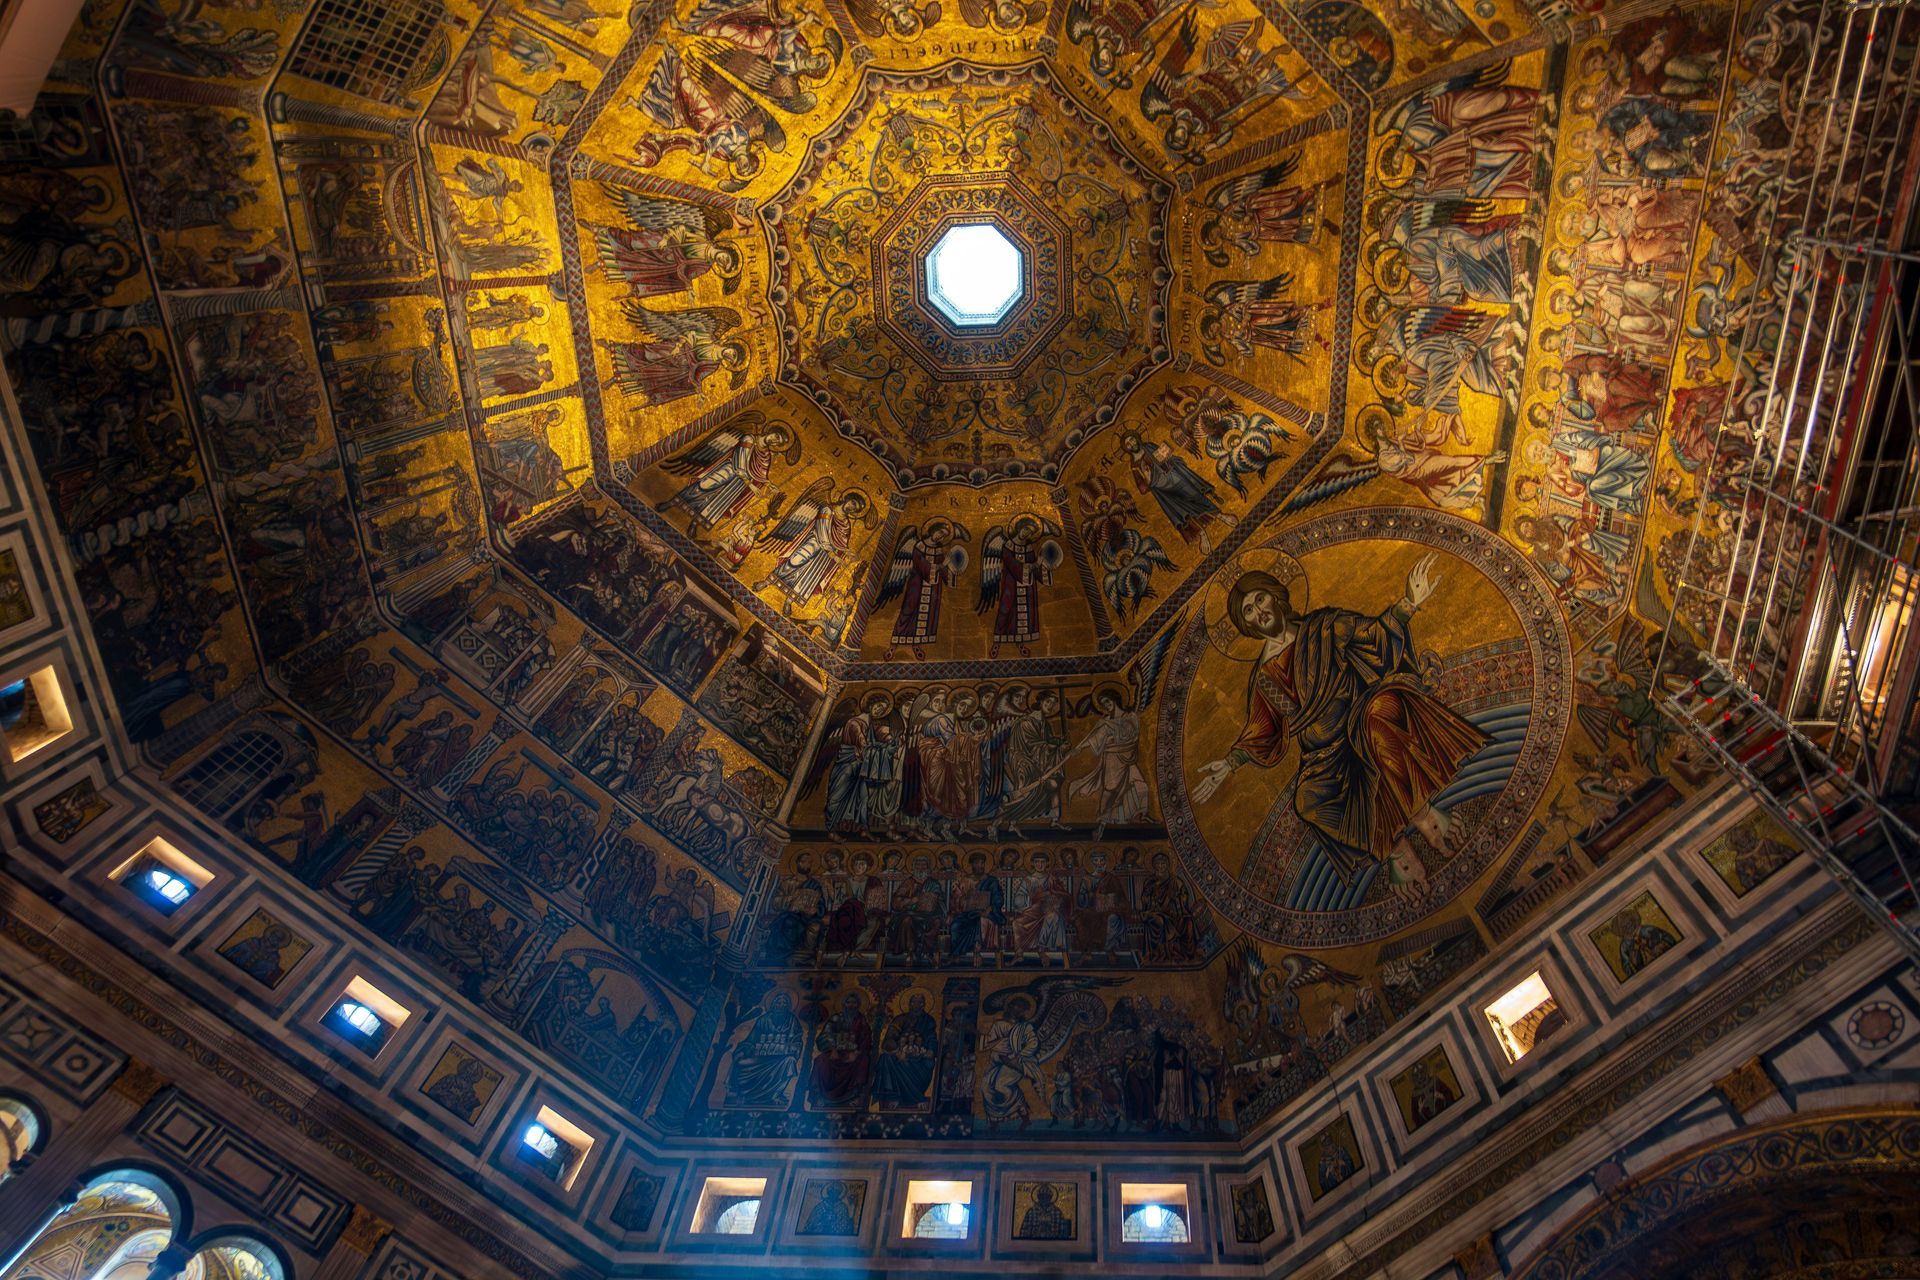 The Baptistery